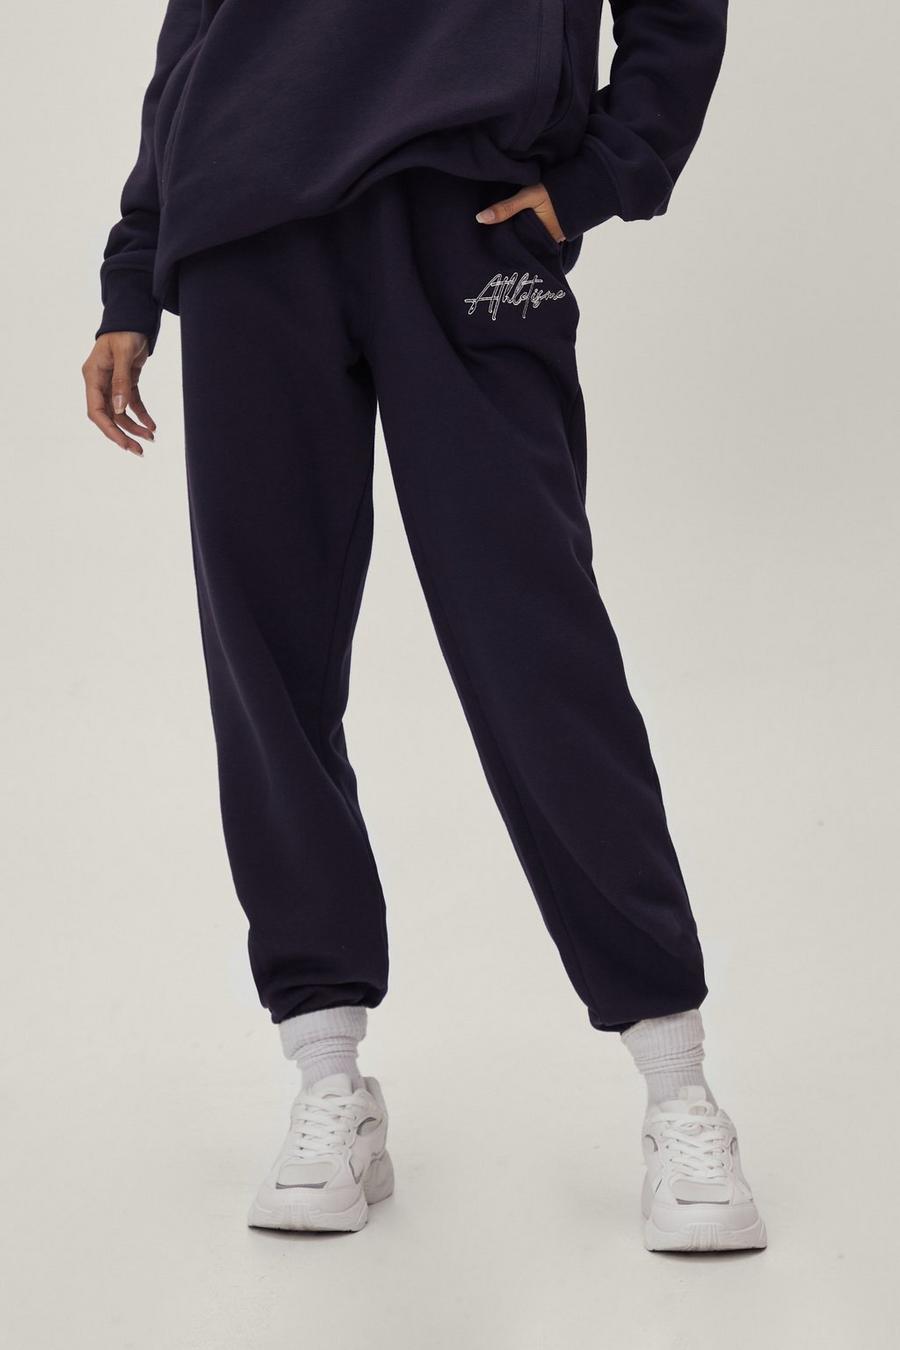 Embroidered Athleisure Relaxed Fit Sweatpants